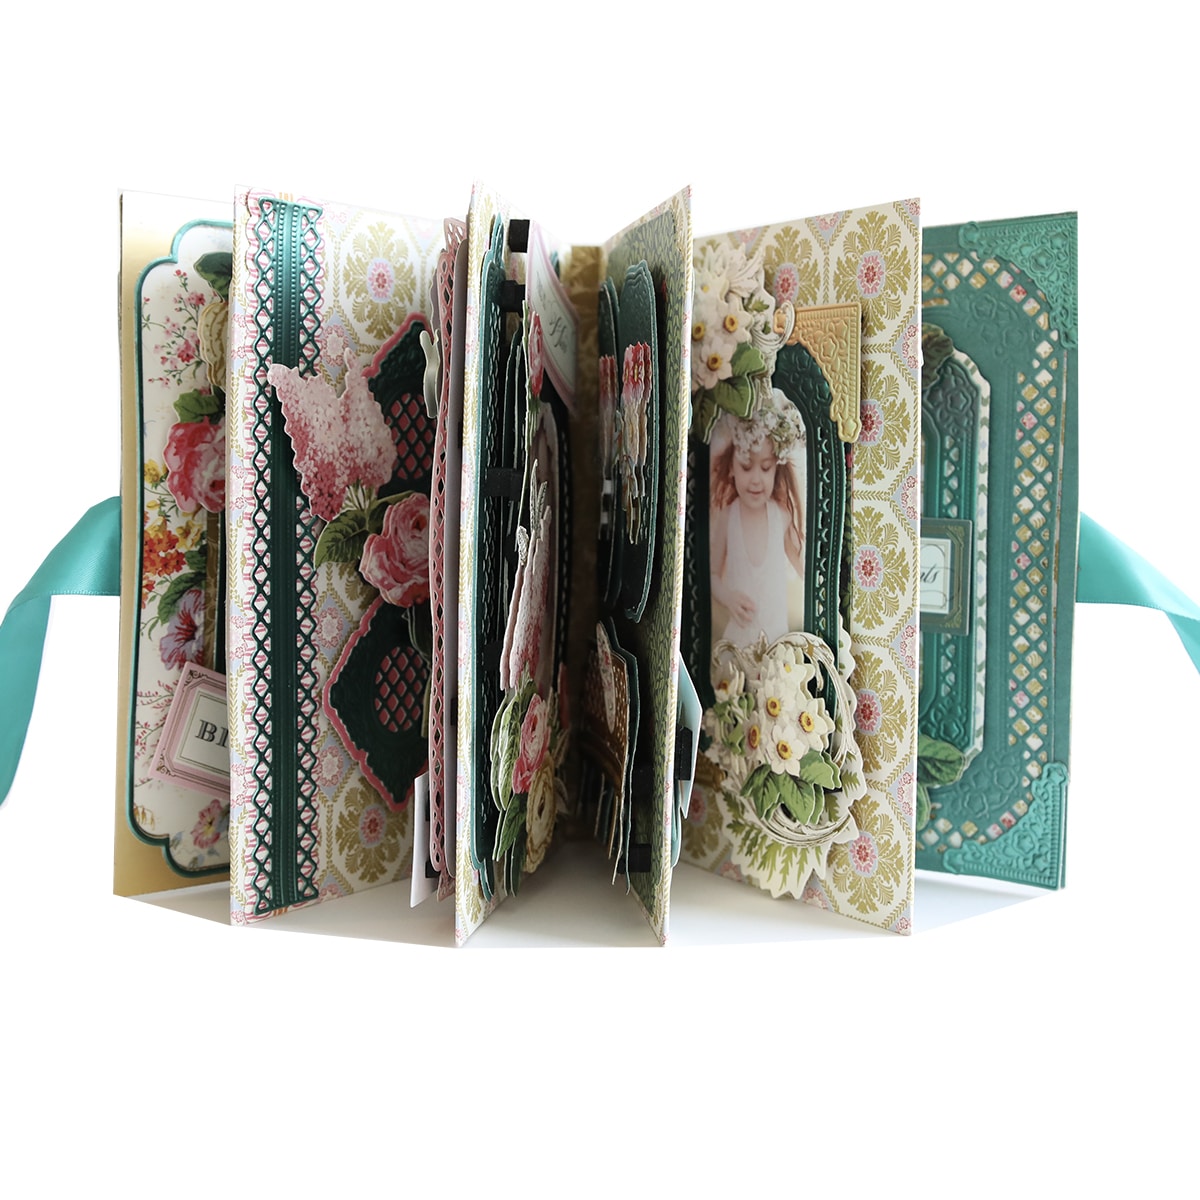 A scrapbook with pictures and ribbons.